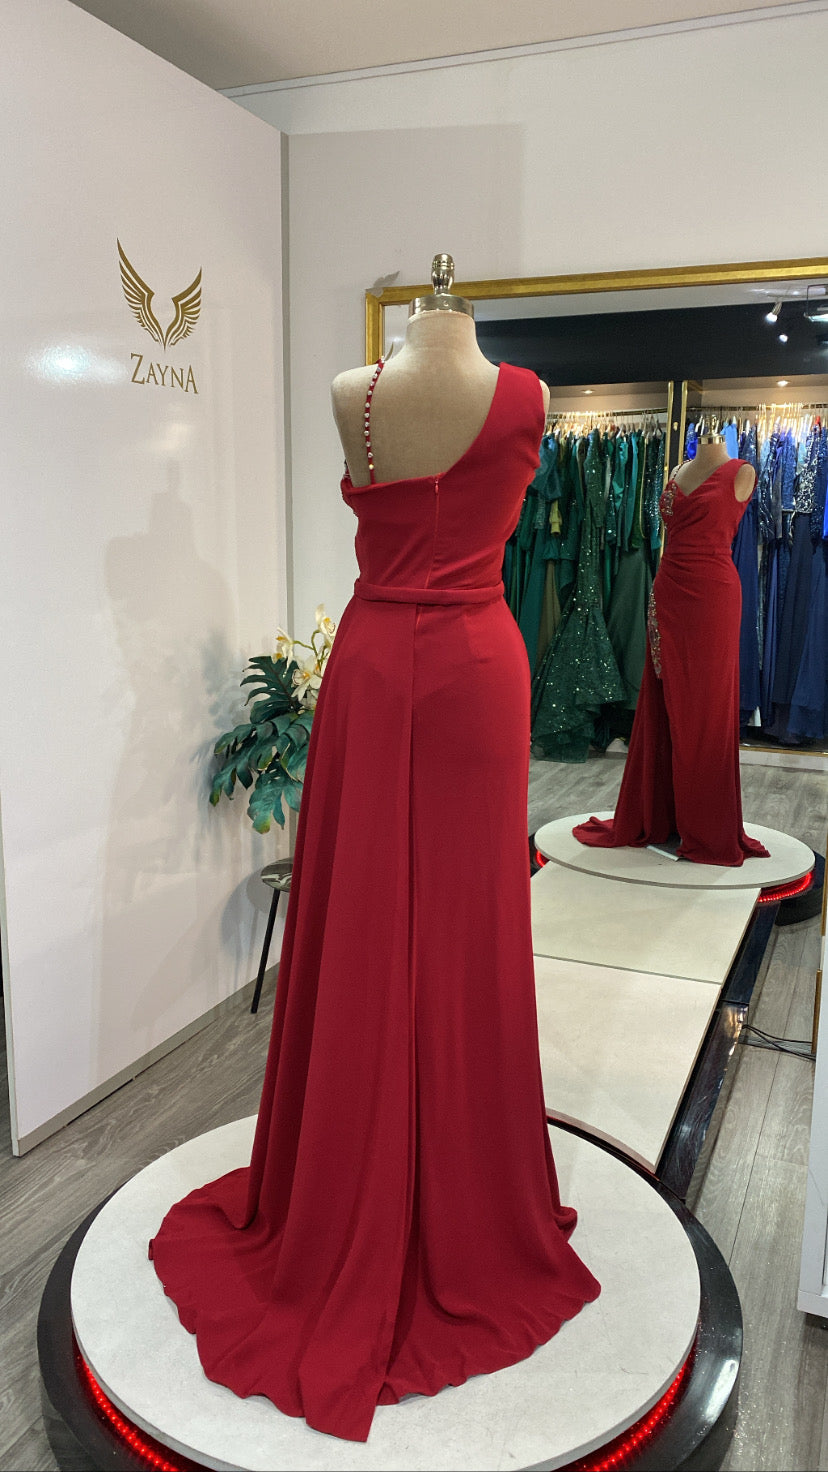 Elegant red dress without sleeves edited